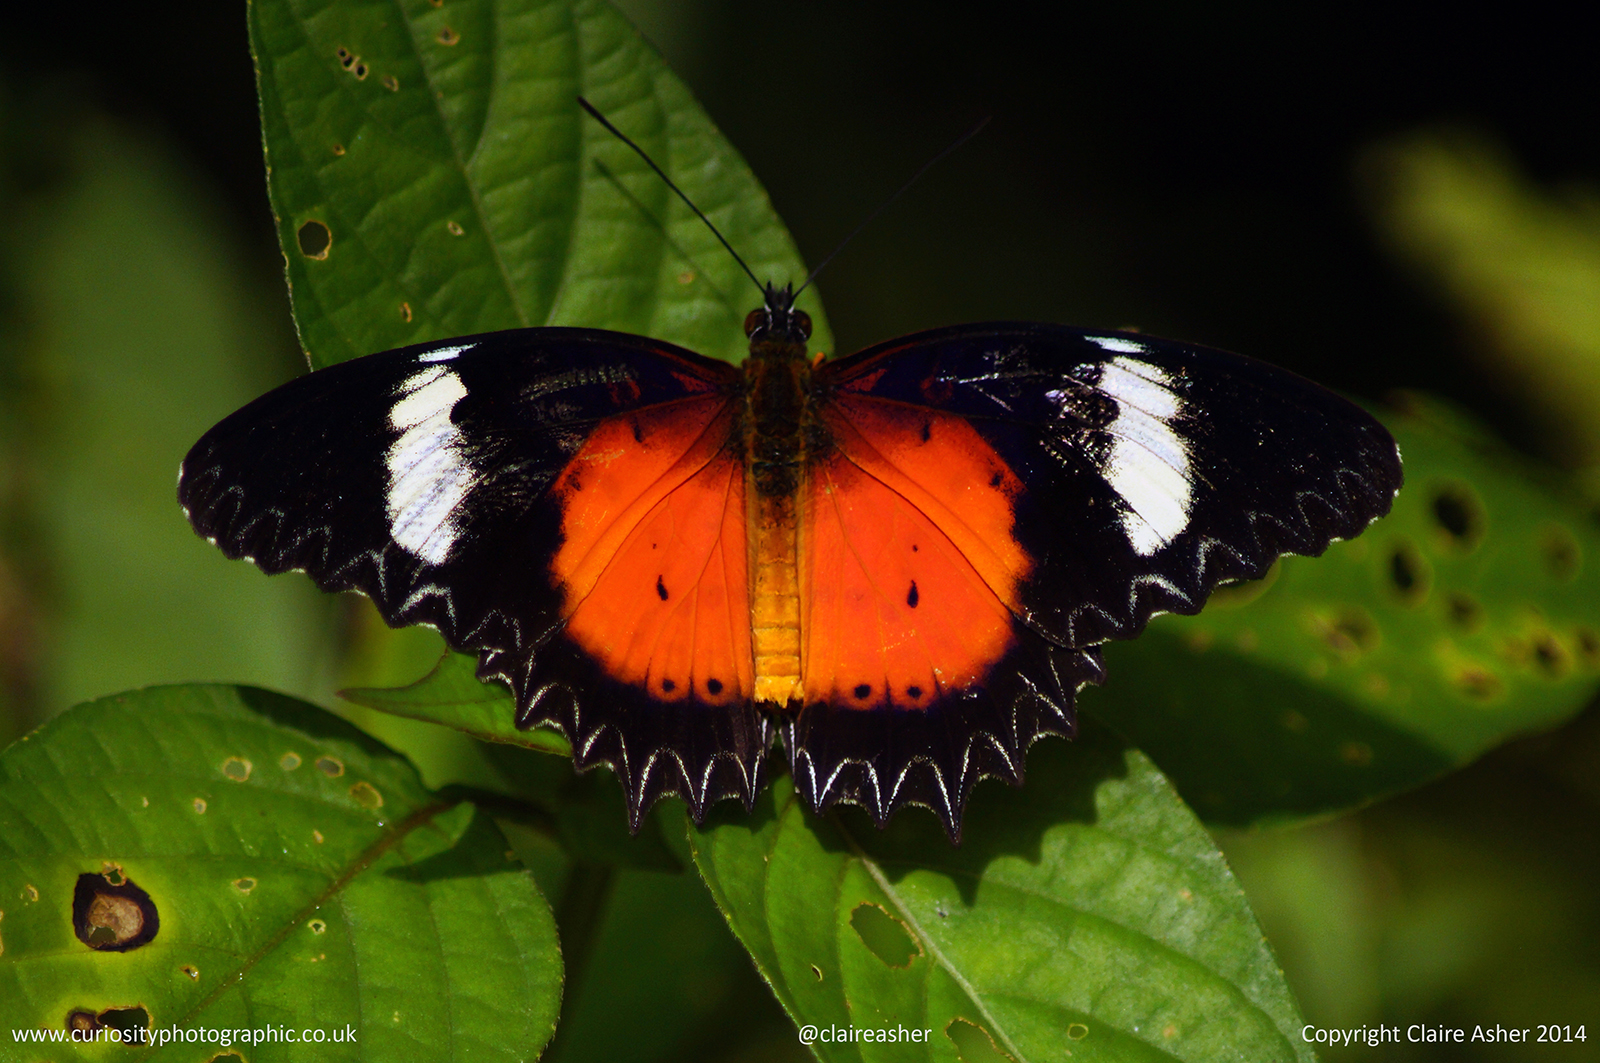 Cethosia butterfly photographed in Borneo, Malaysia in 2014